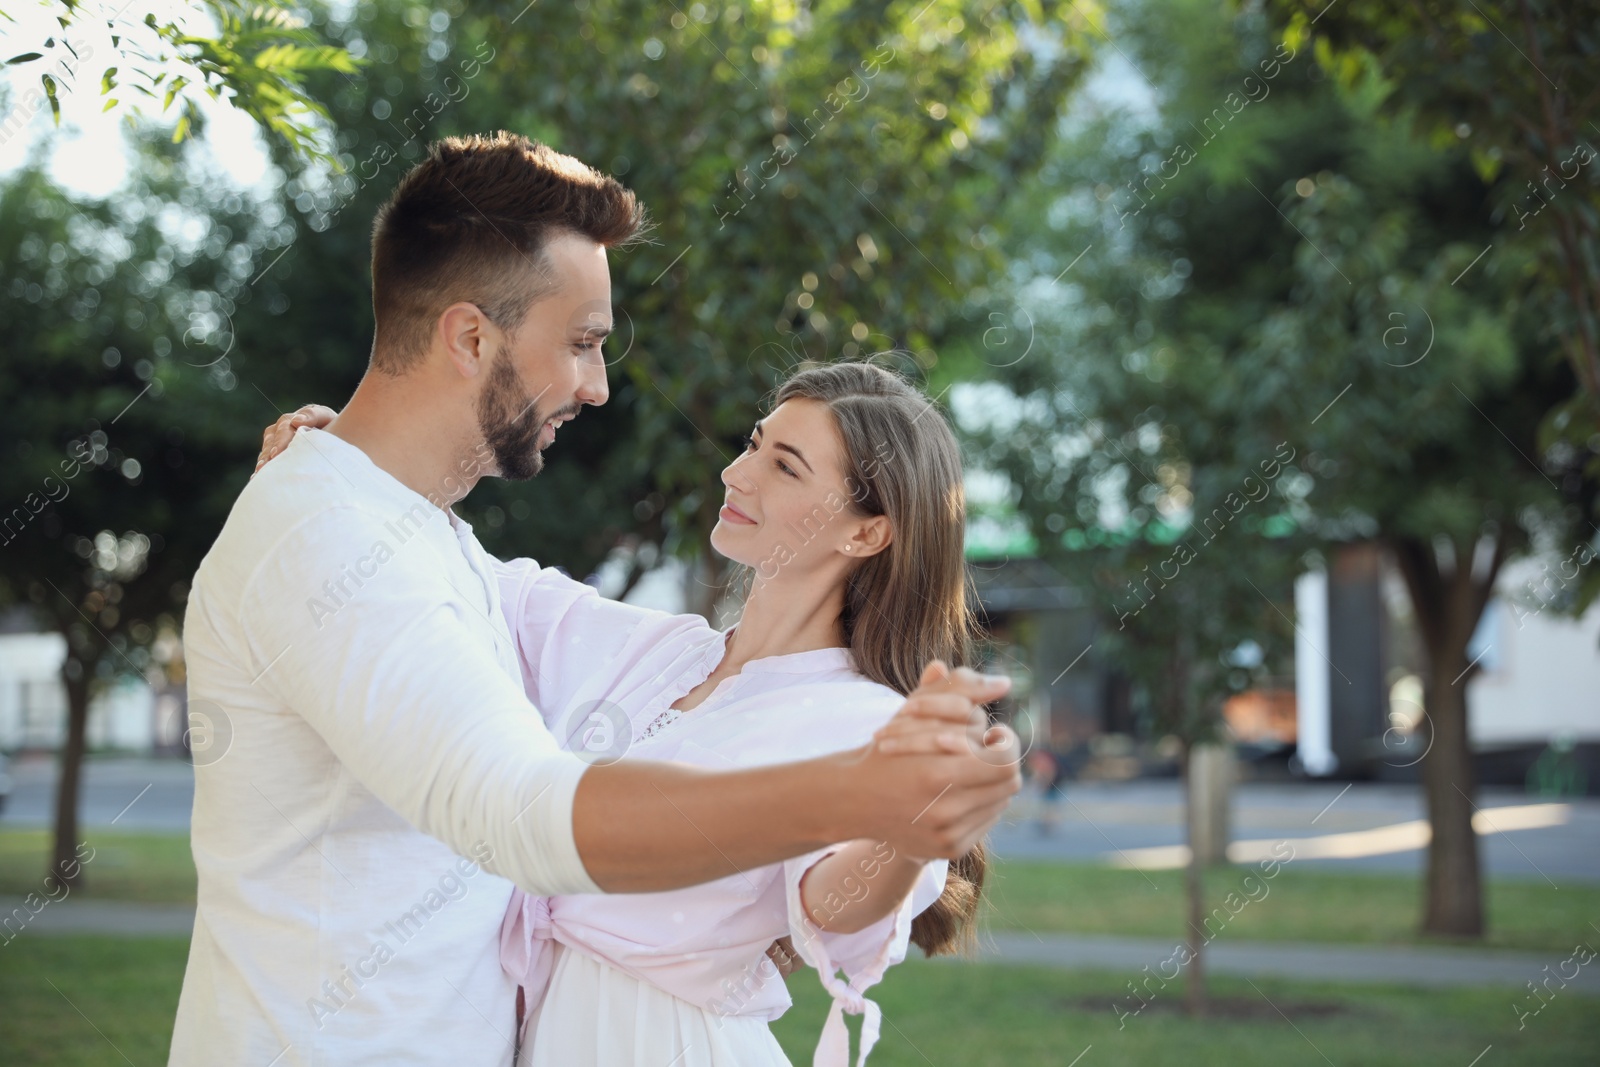 Photo of Lovely young couple dancing together in park on sunny day